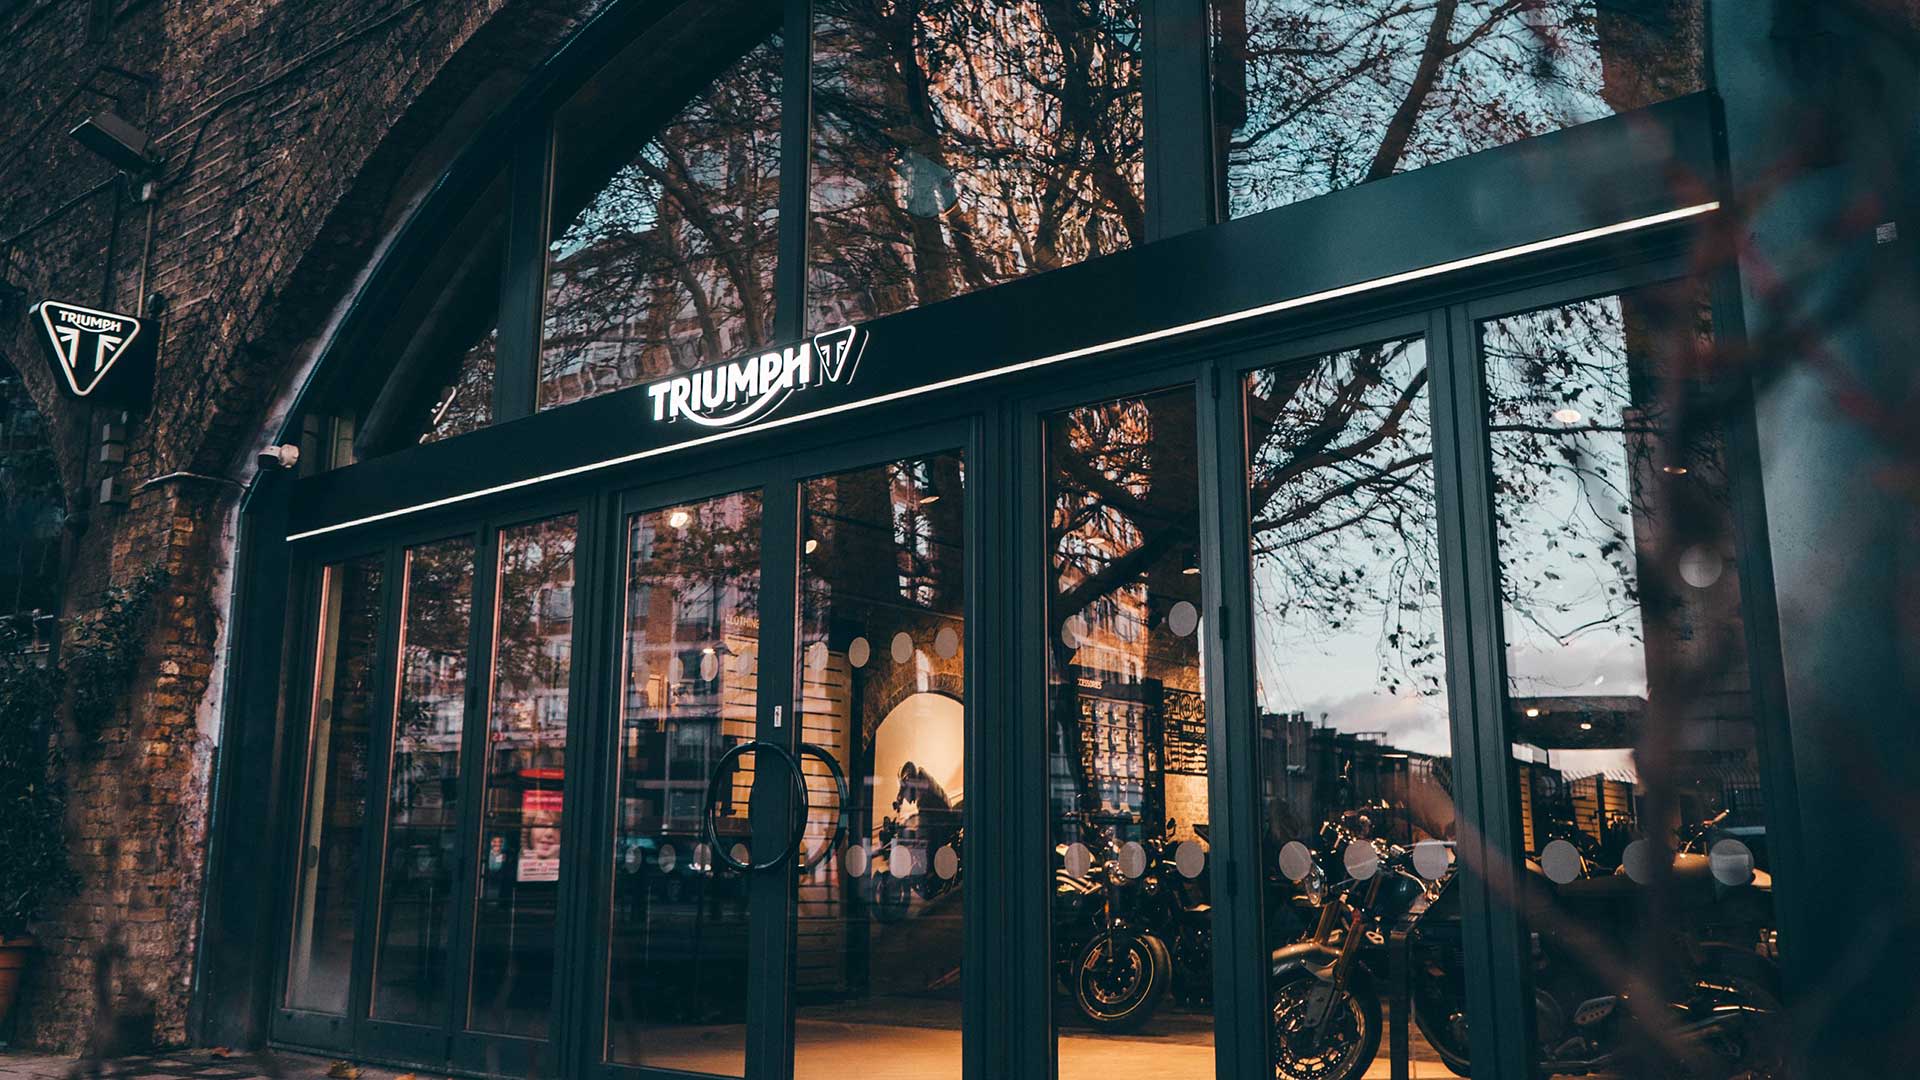 Triumph motorcycles dealership in London)